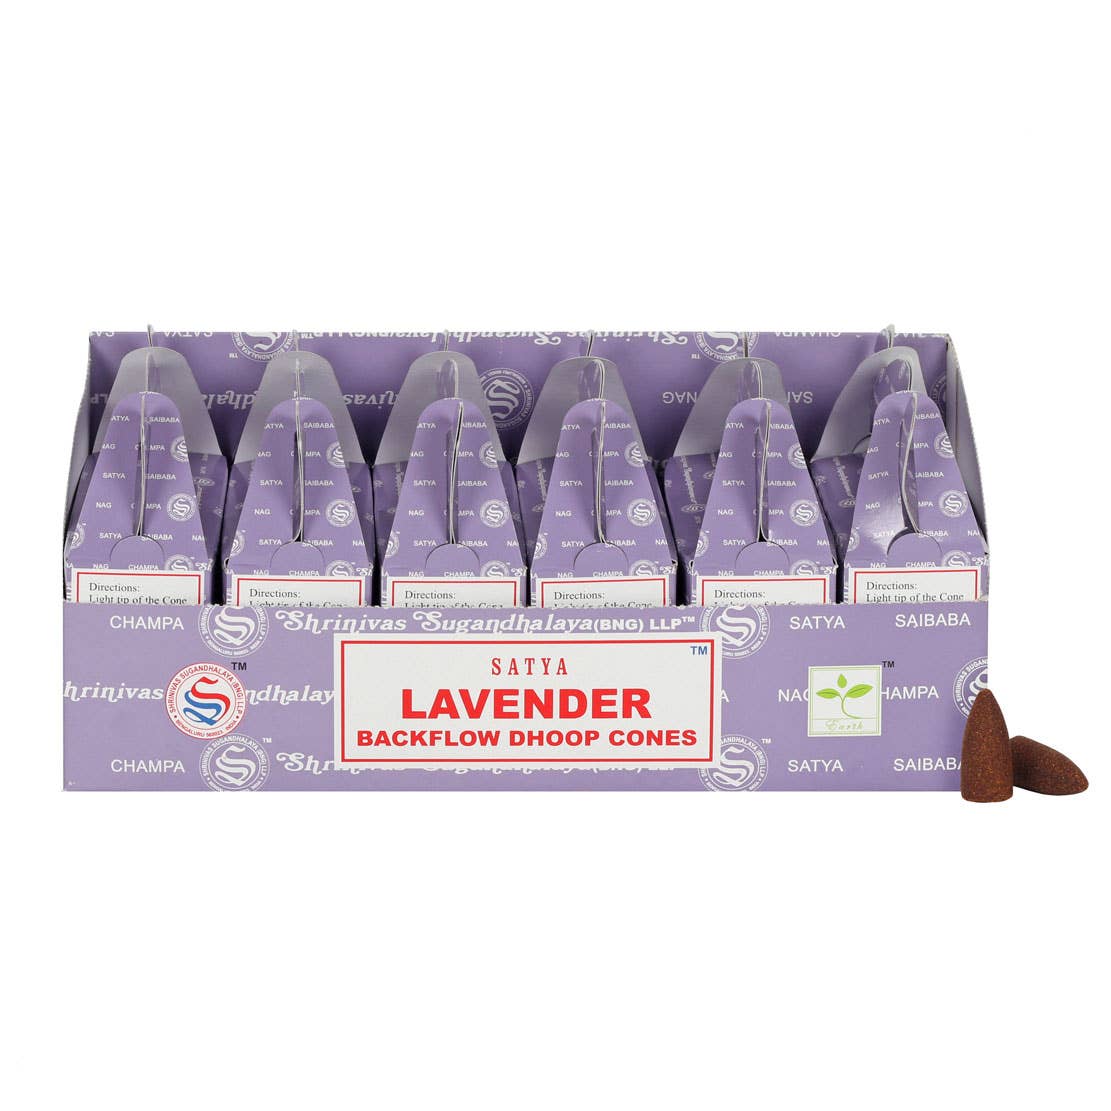 Something Different Wholesale - Set of 6 Packets of Satya Lavender Backflow Dhoop Cones - The Oddity Den